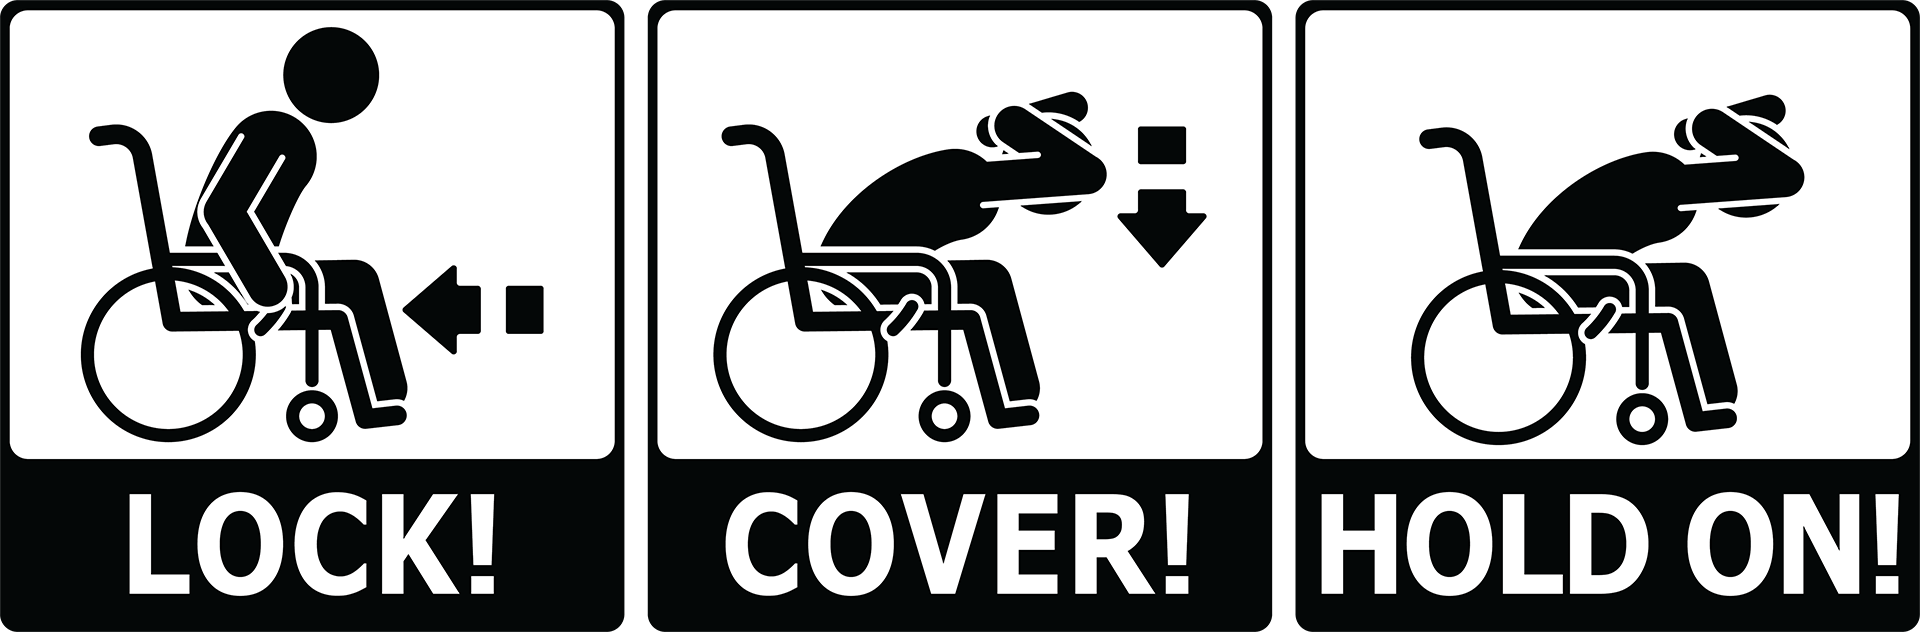 Lock, Cover, Hold On using a wheelchair graphic in black and white